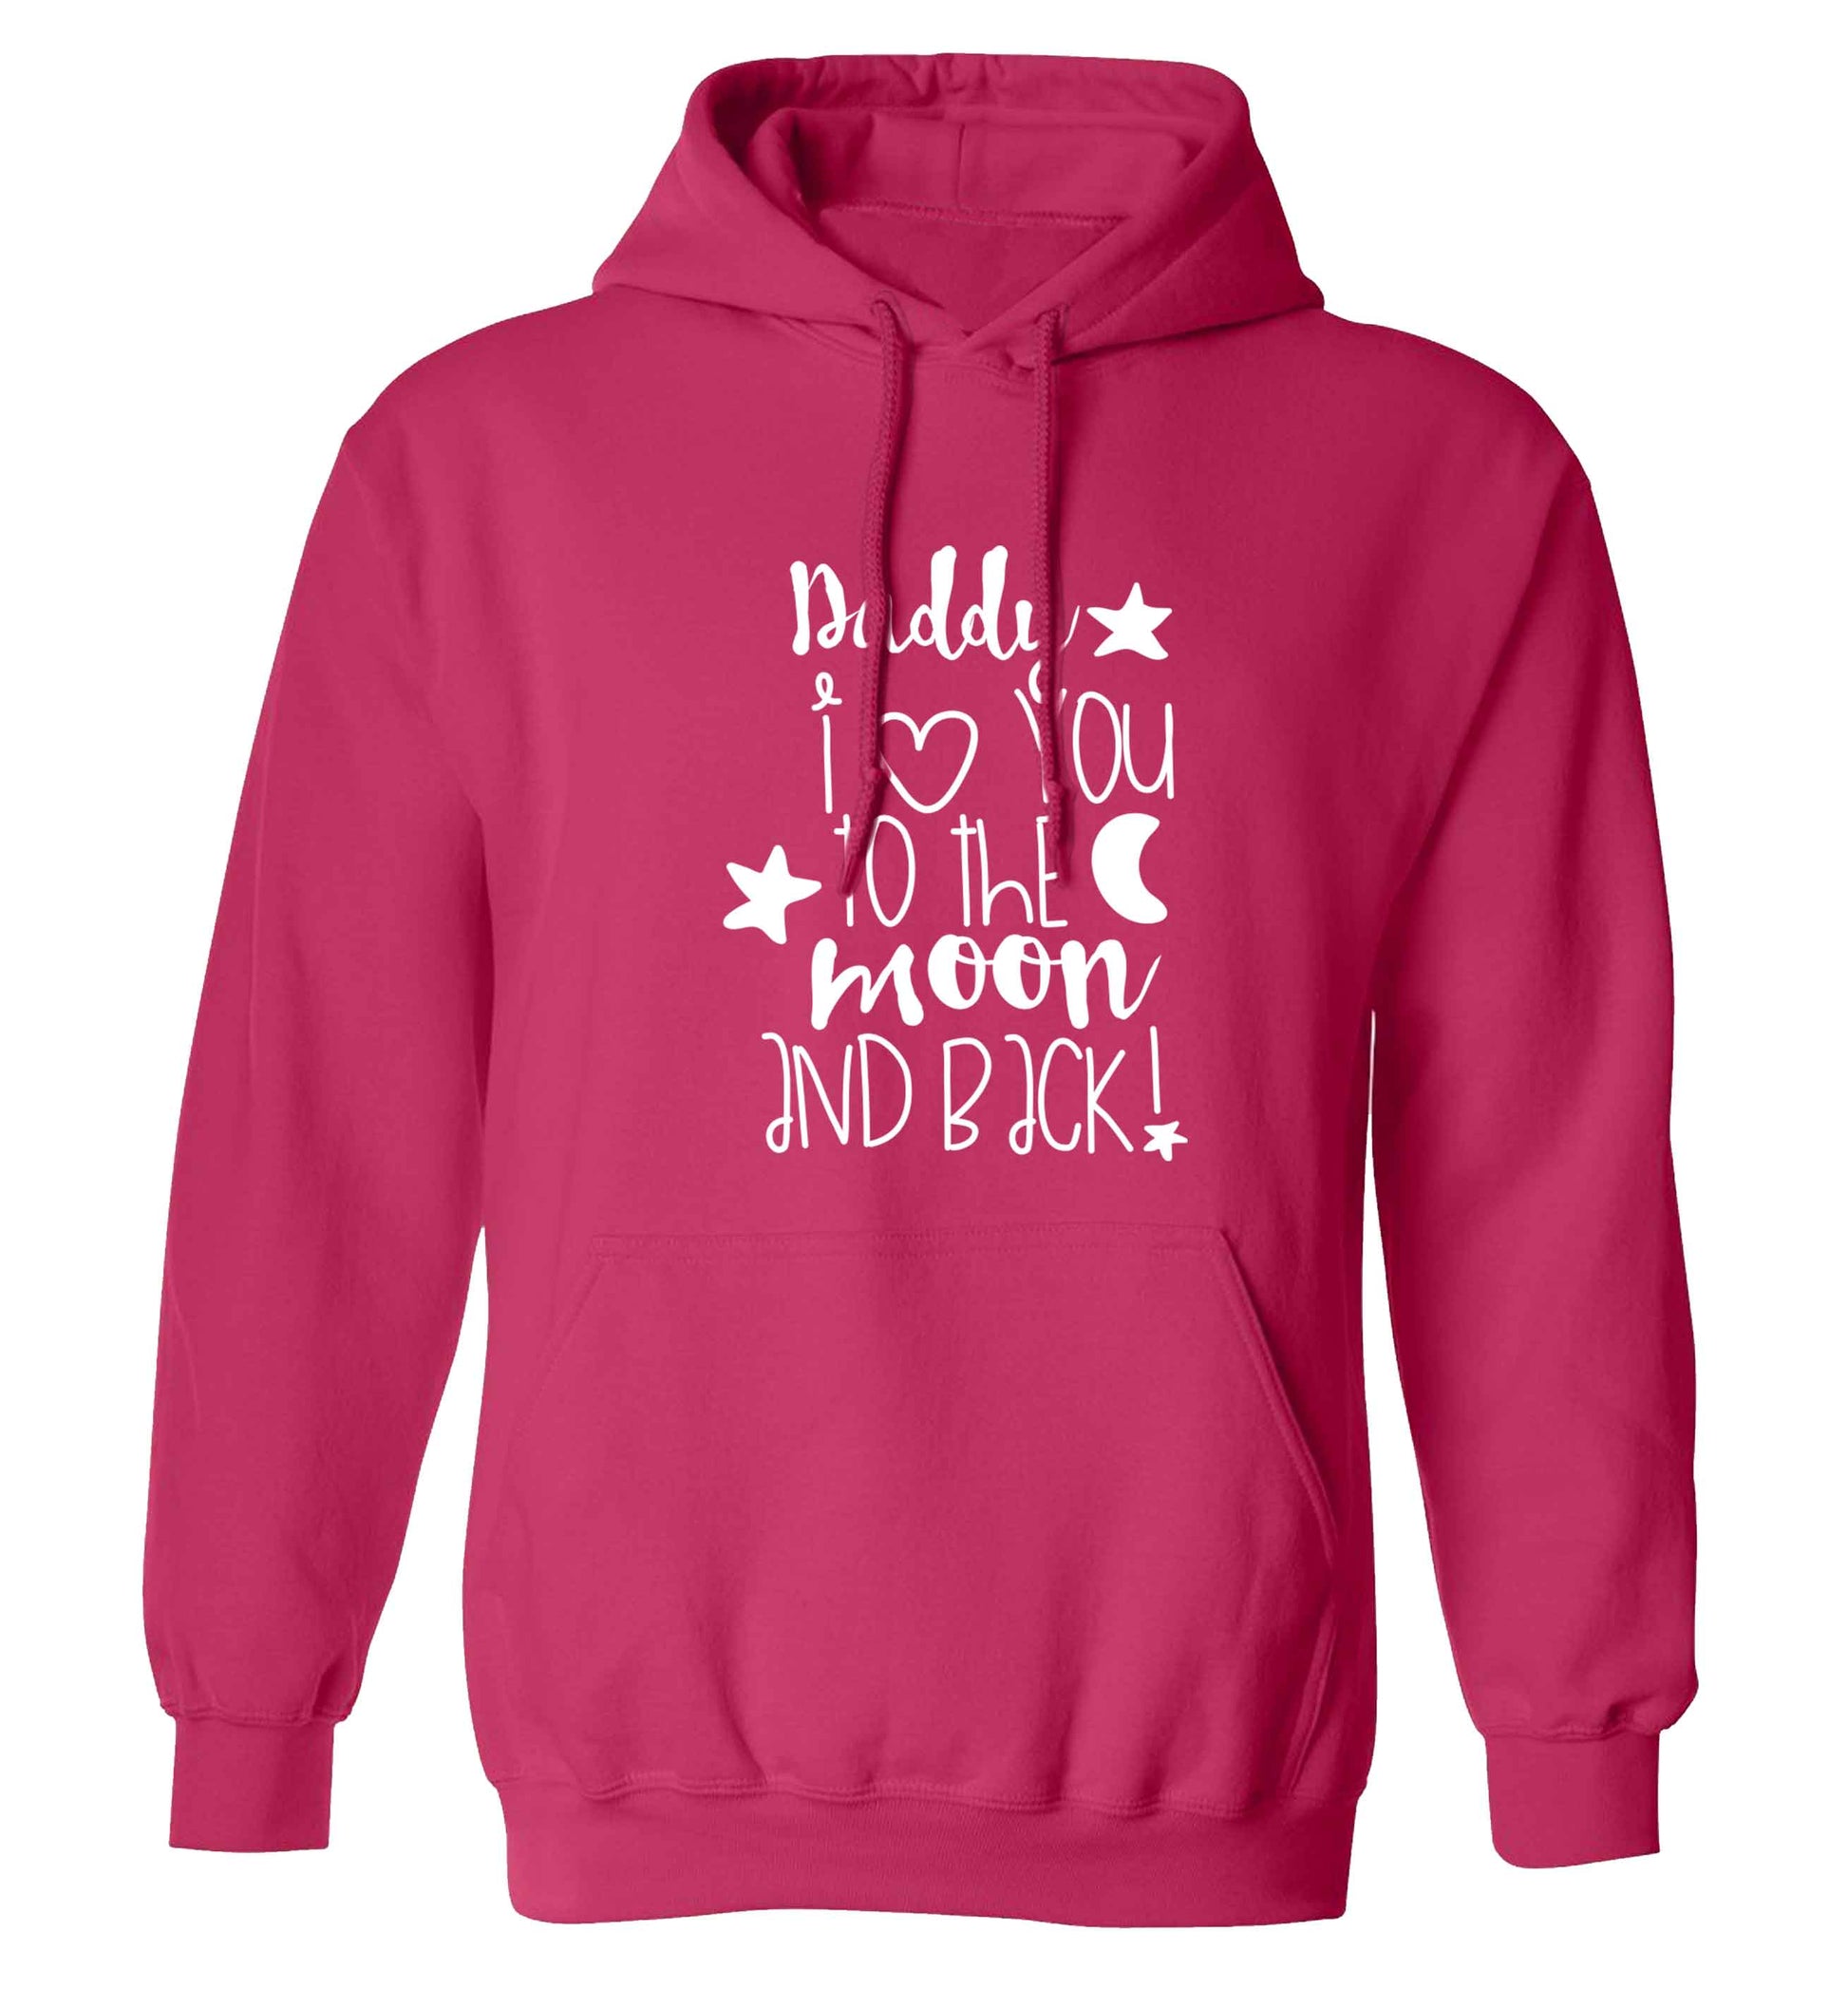 Daddy I love you to the moon and back adults unisex pink hoodie 2XL